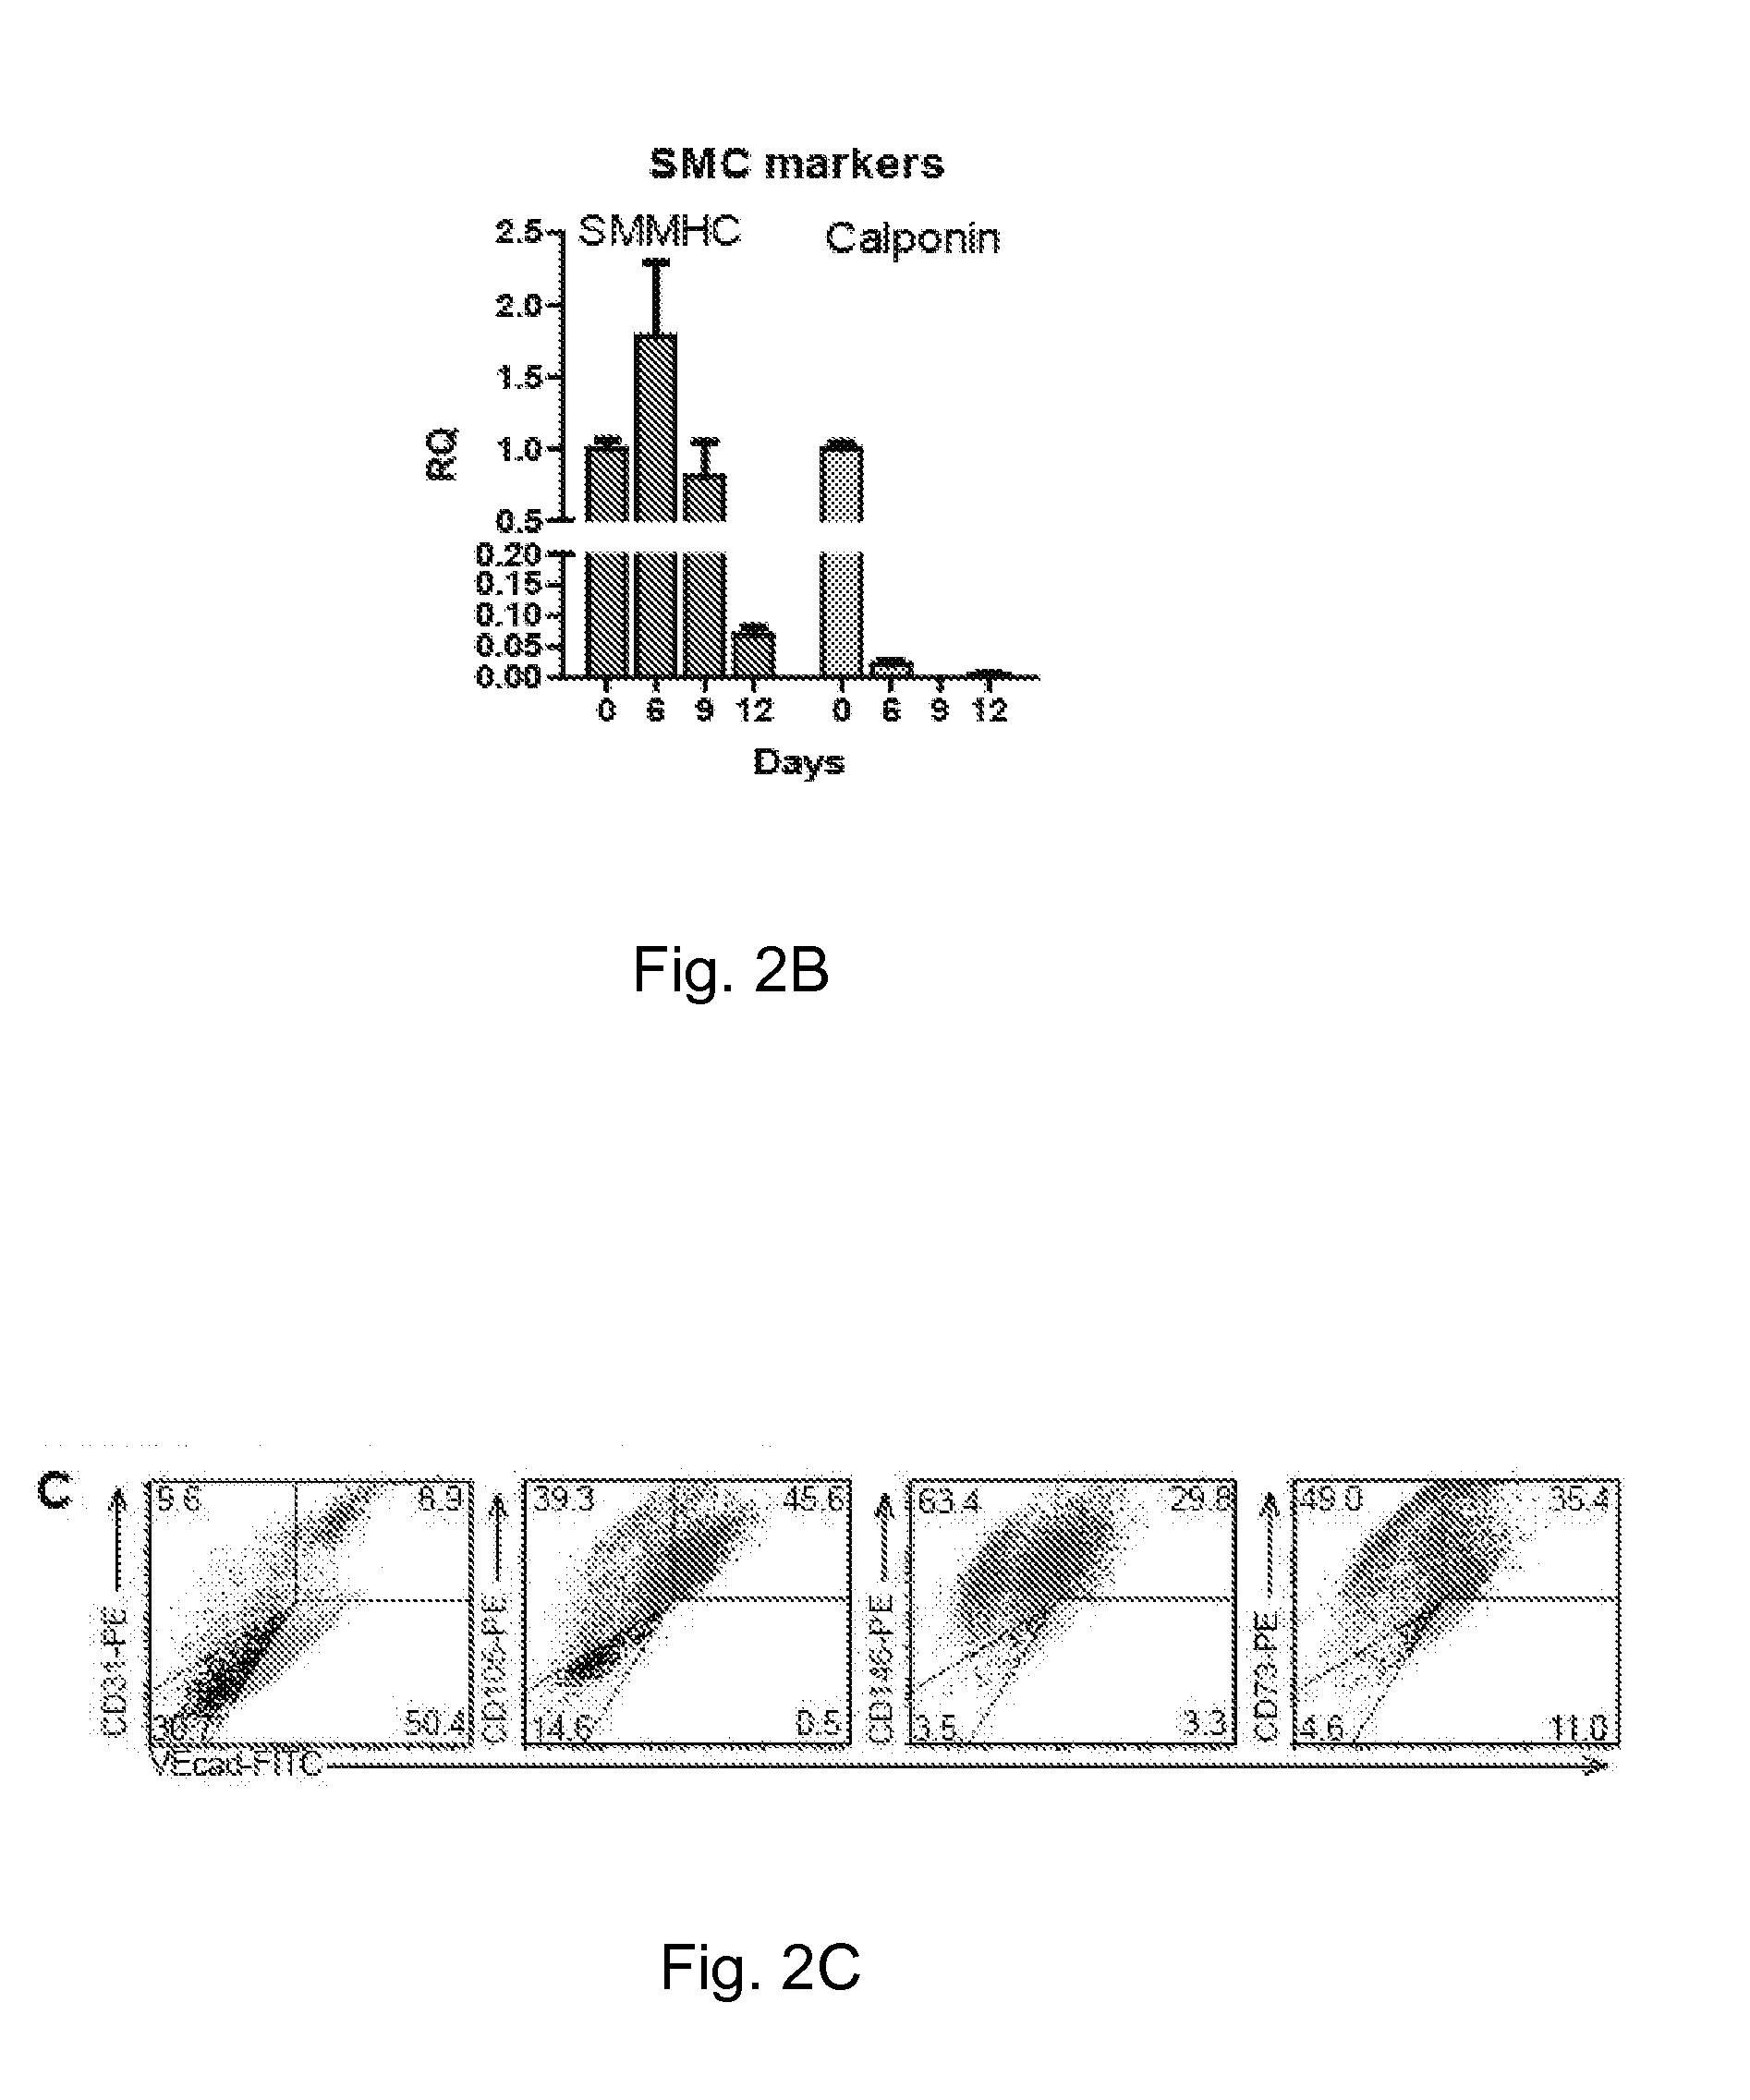 Method for guiding the derivation of endothelial cells from human pluripotent stem cells employing two-dimensional, feeder-free differentiation